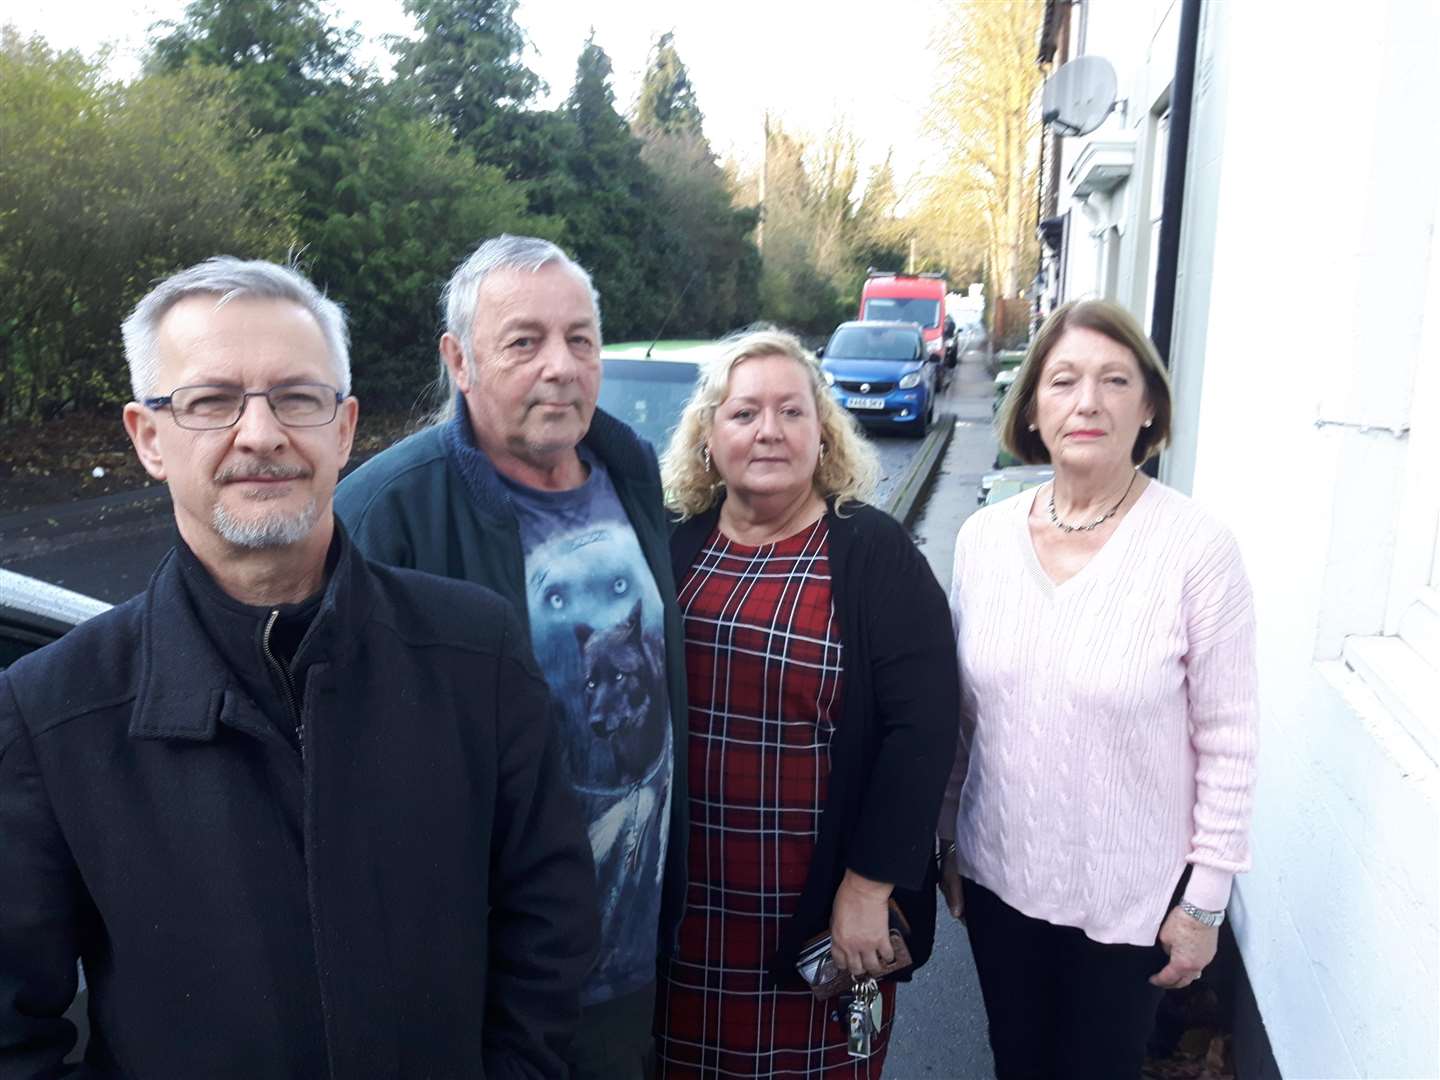 Gary Cook, Michael Ash, Rachele Verrier and Anna Gray outside their homes